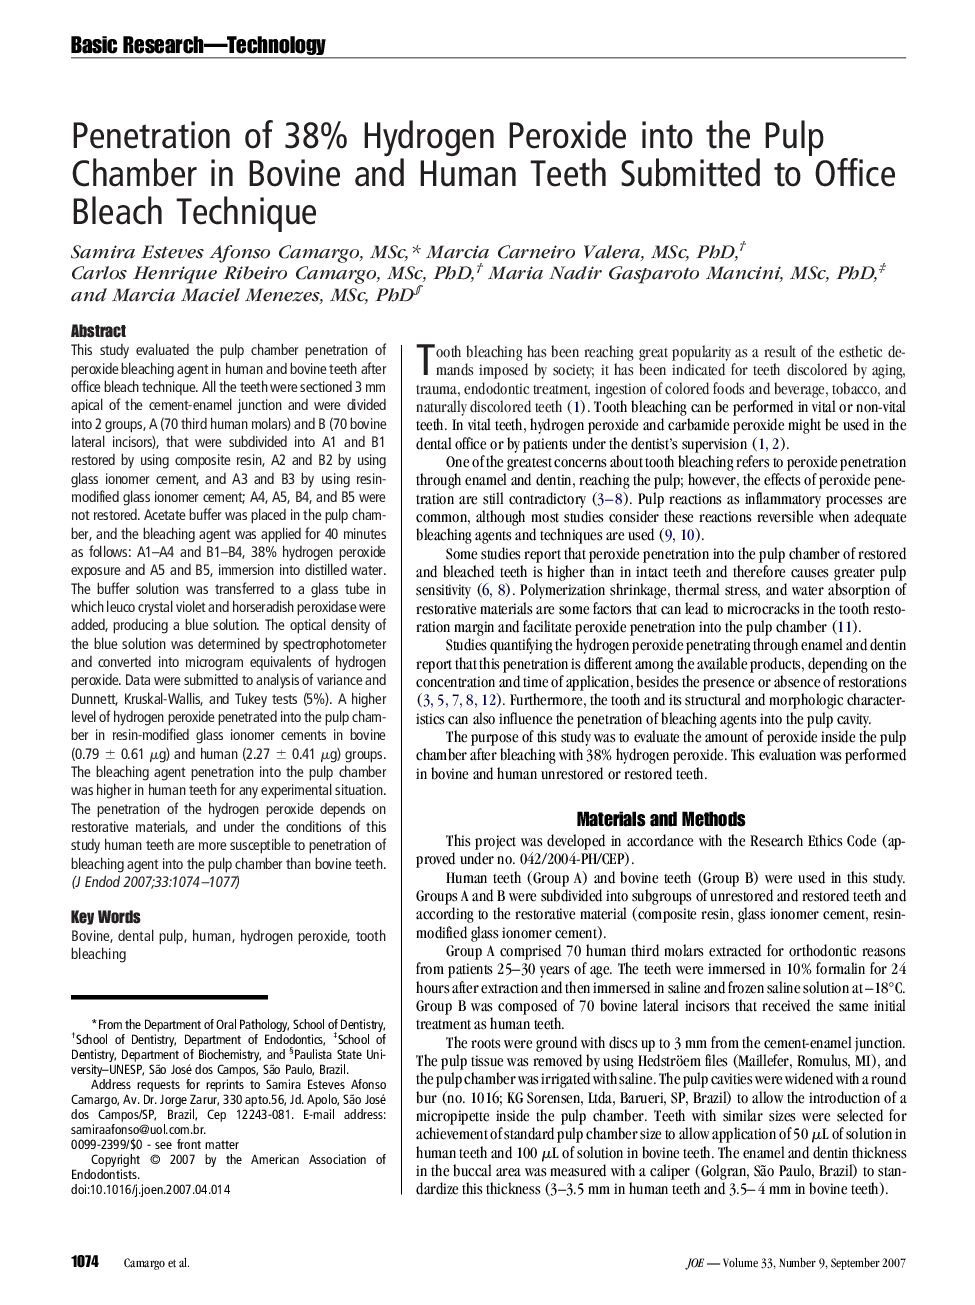 Penetration of 38% Hydrogen Peroxide into the Pulp Chamber in Bovine and Human Teeth Submitted to Office Bleach Technique